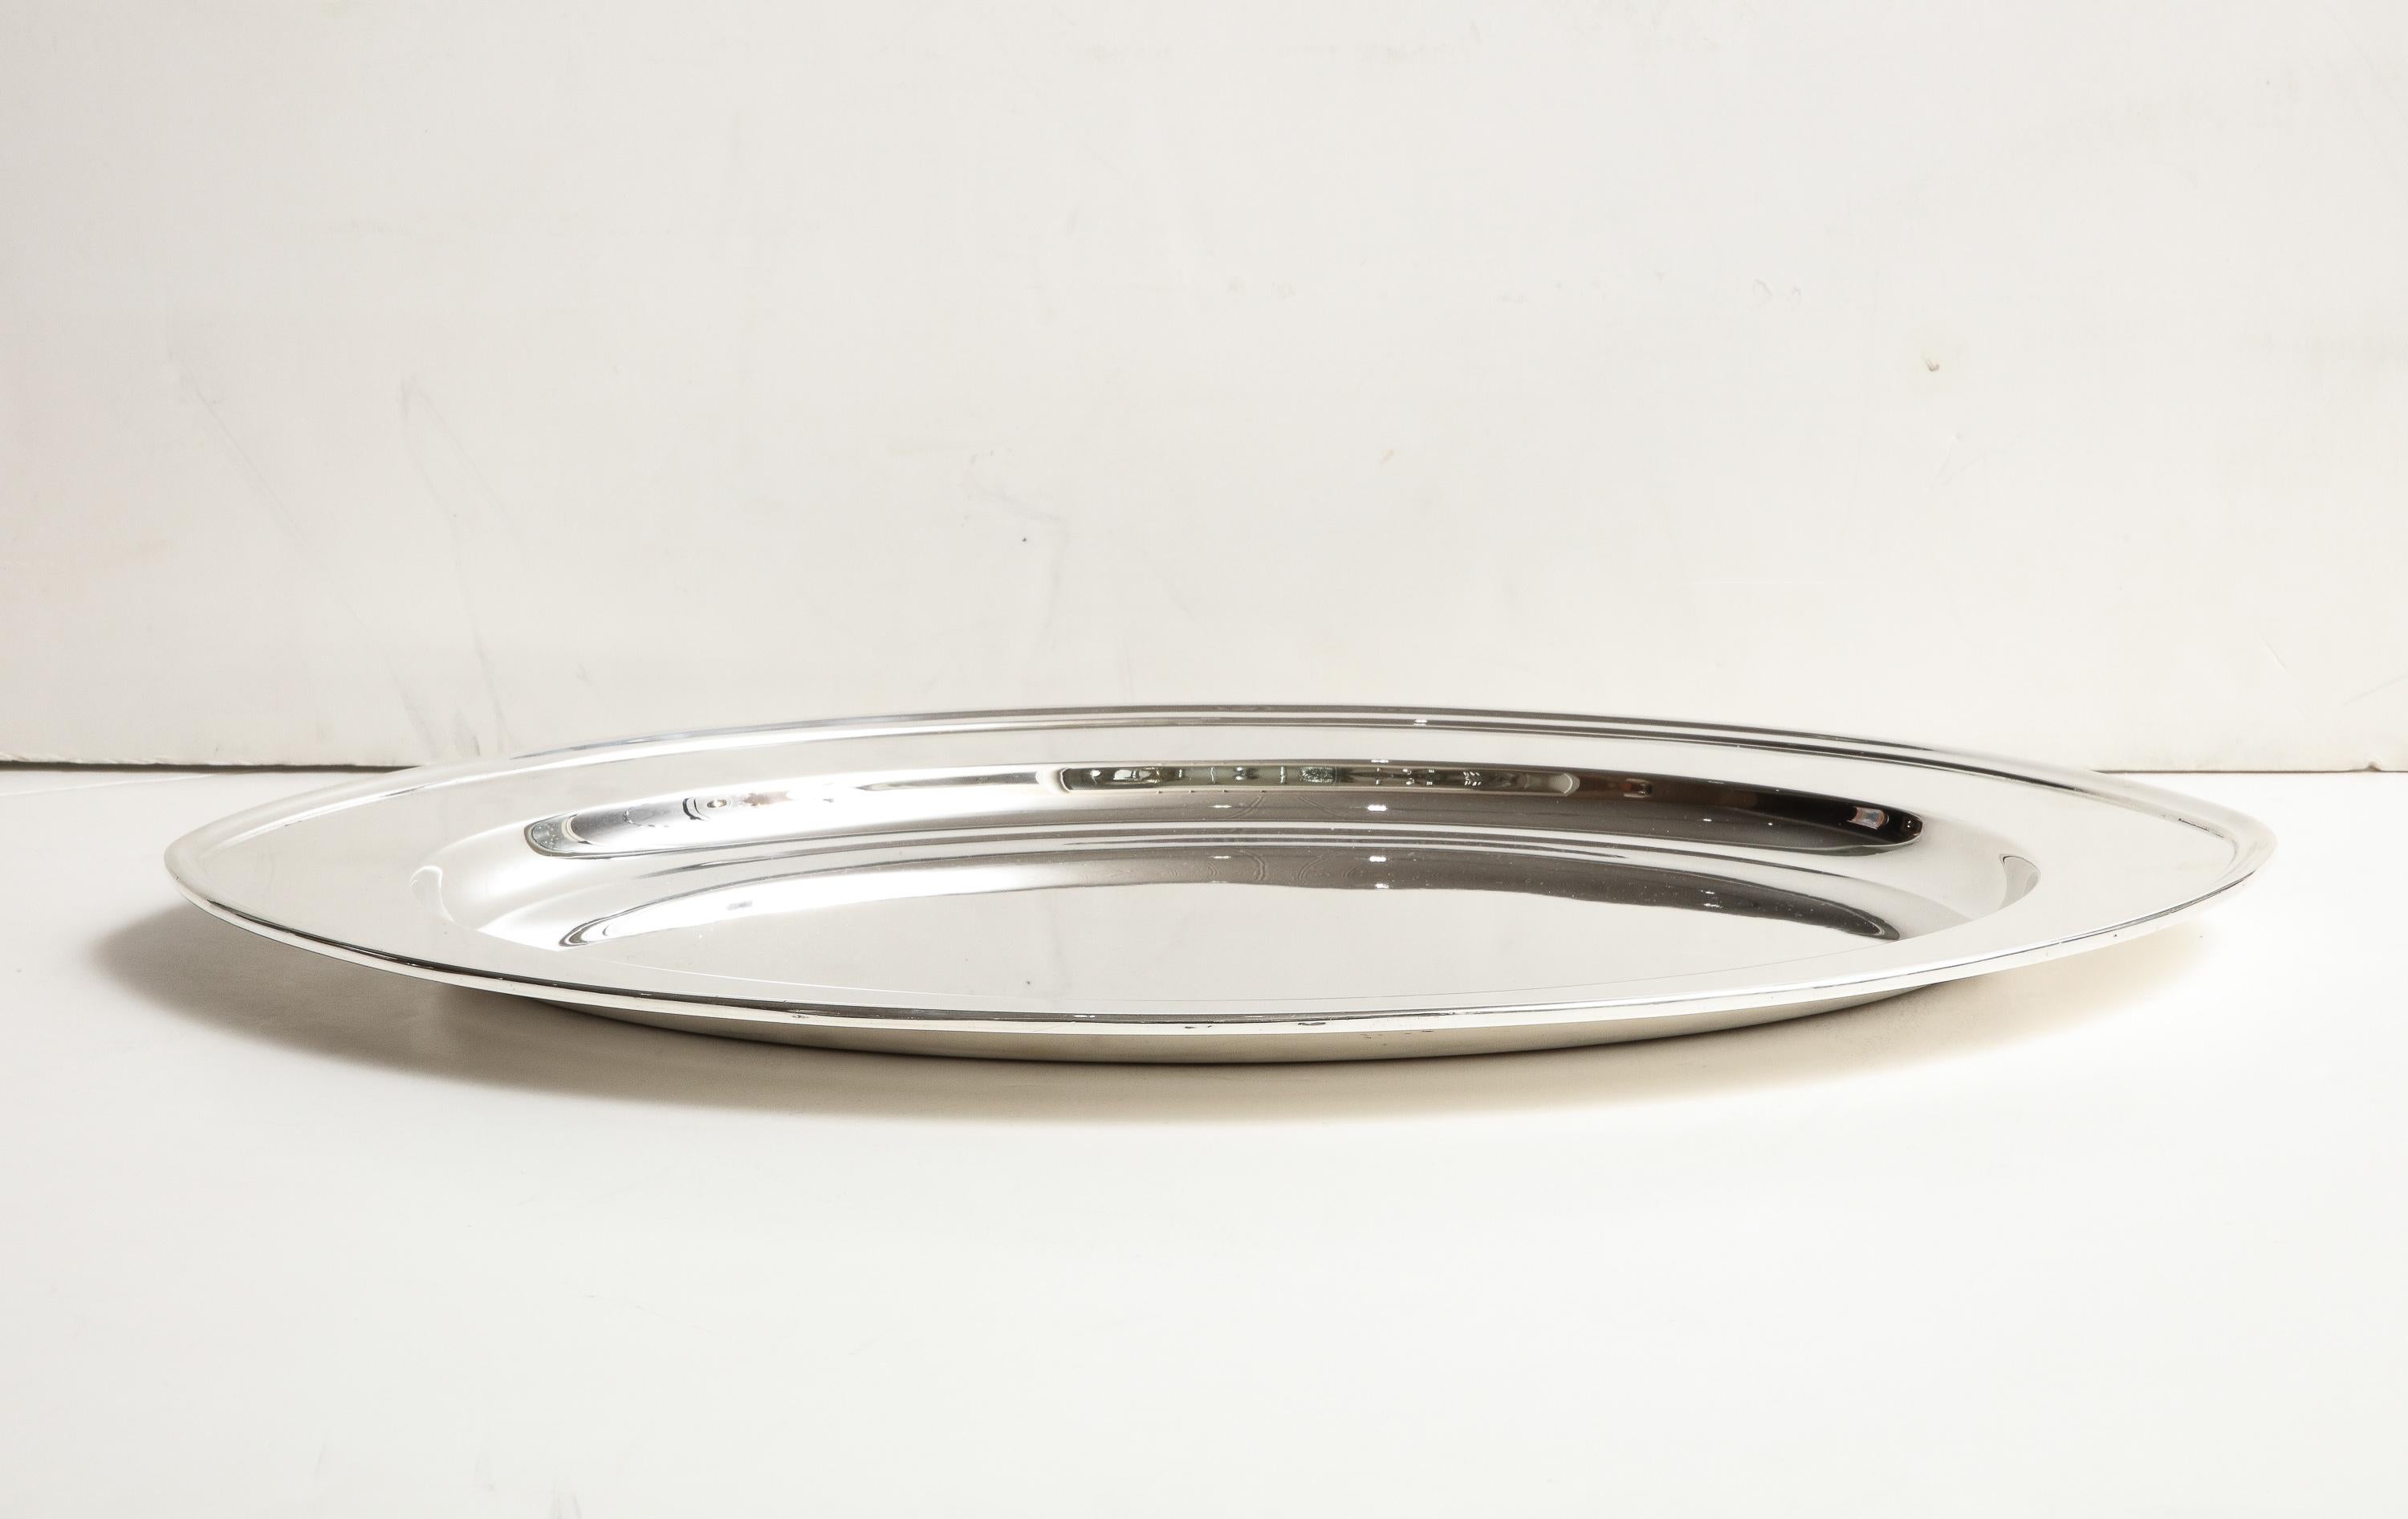 Large Art Deco Period Solid Sterling Silver Serving Platter By Gorham For Sale 9